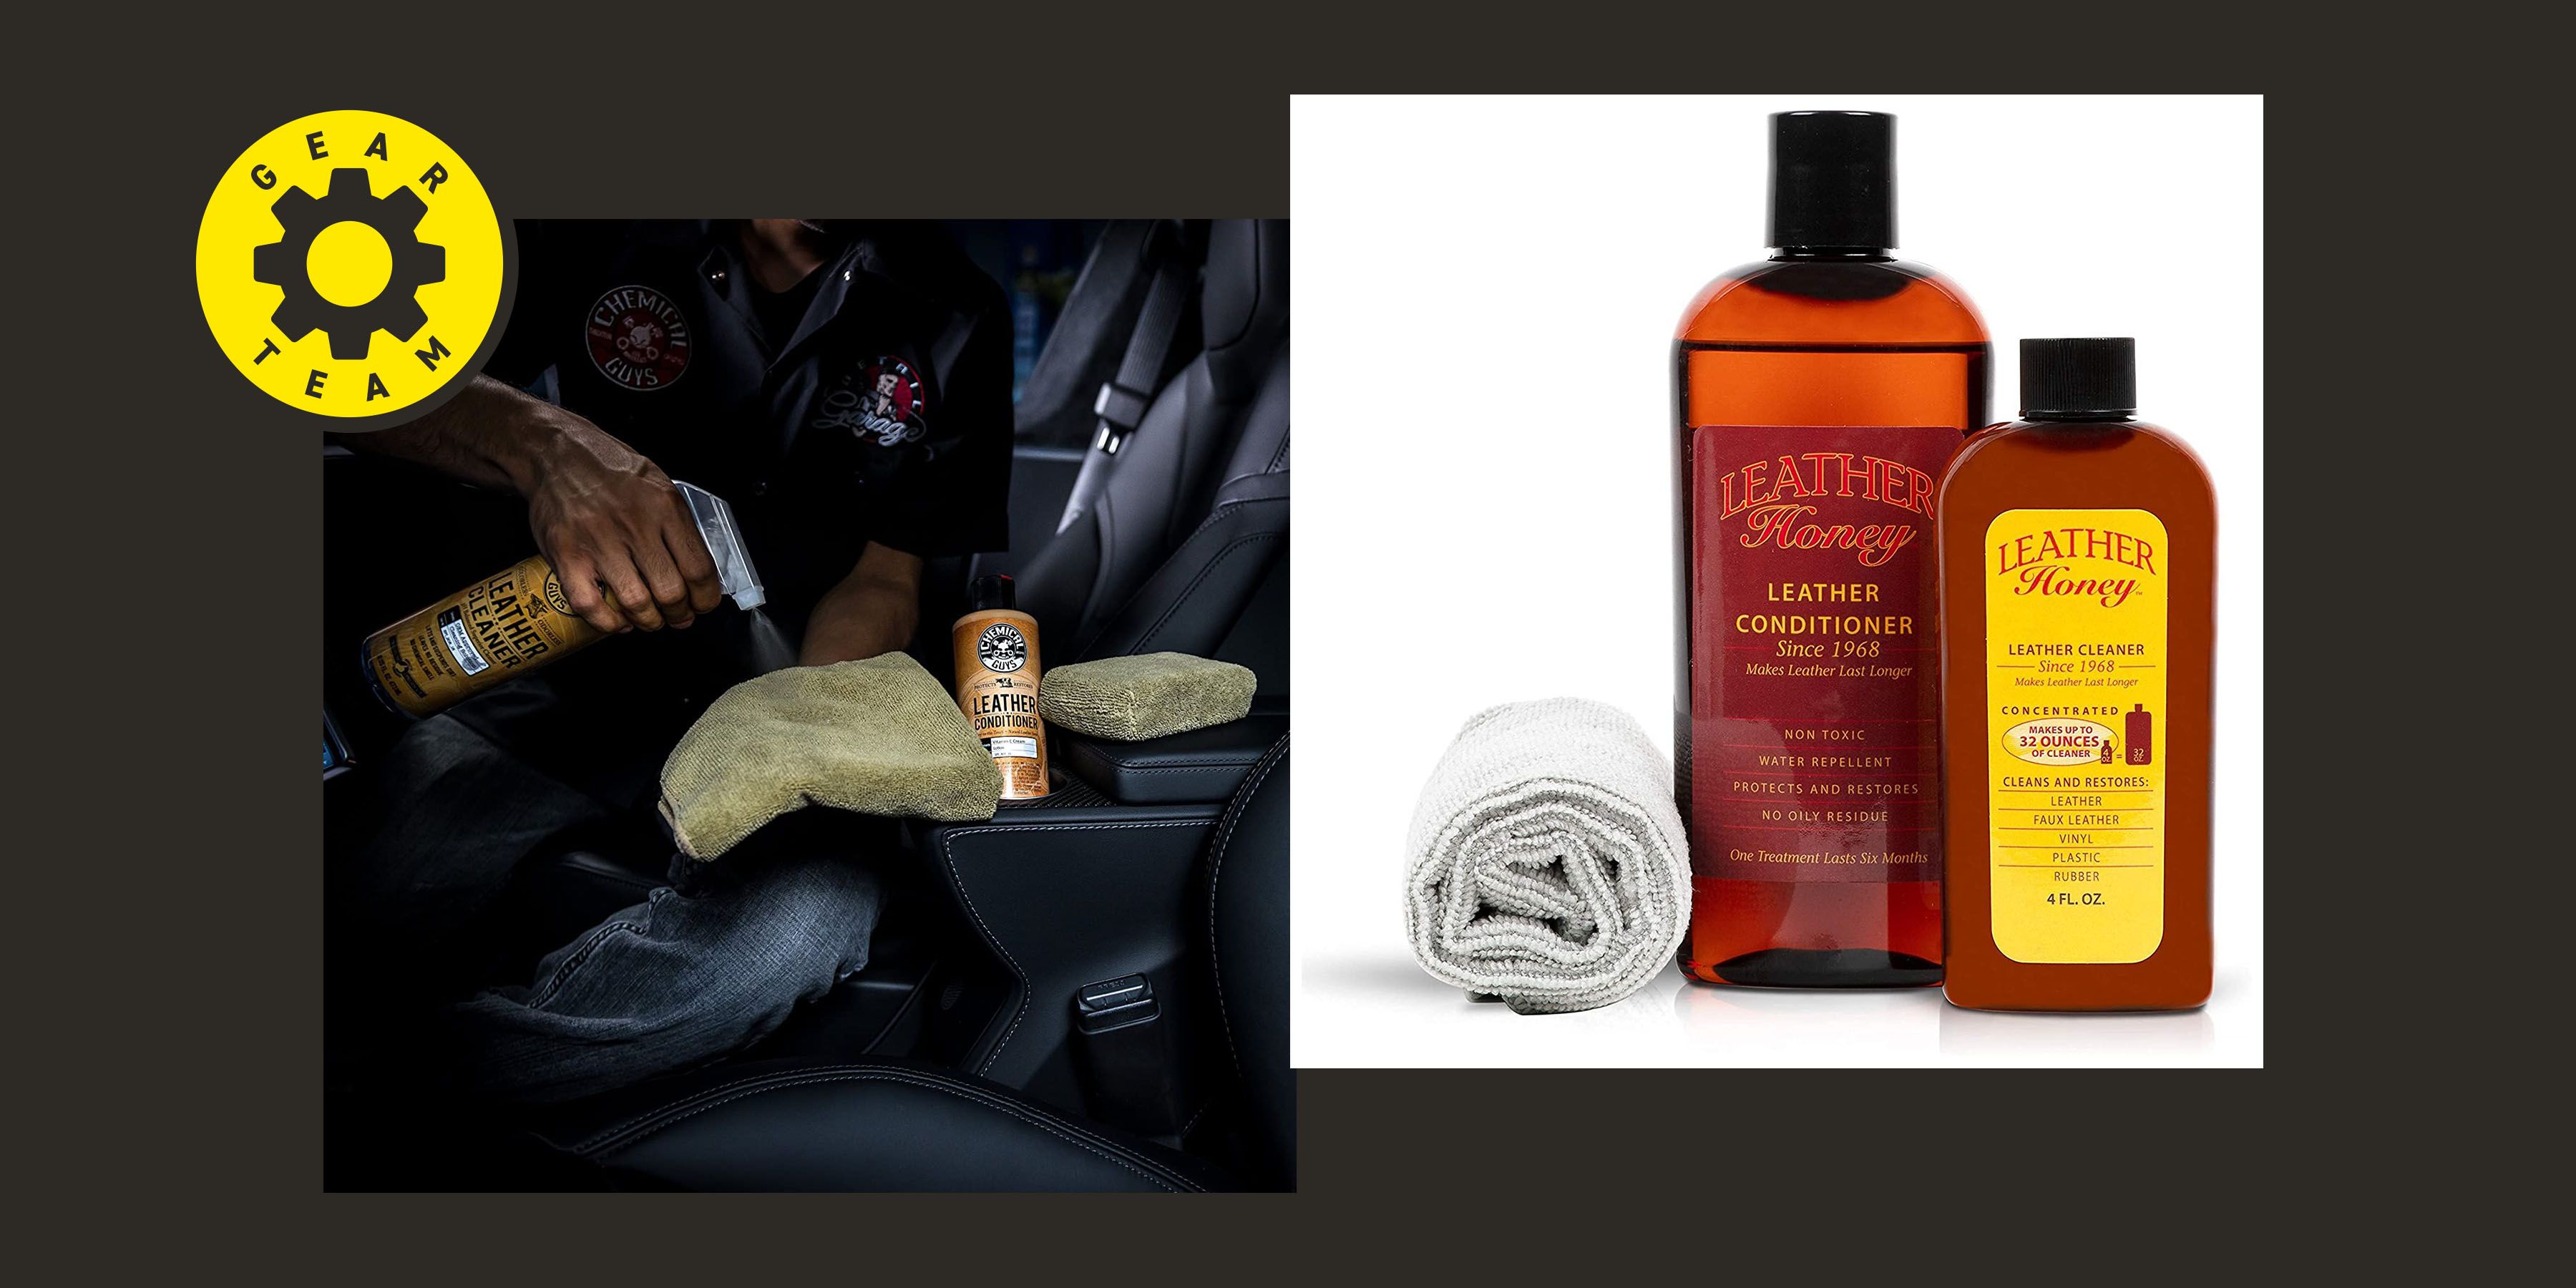 Leather Honey Leather Conditioner - Quality Leather Care, Made in The USA  Since 1968 - Leather Conditioner for Auto Interiors, Furniture, Shoes,  Bags